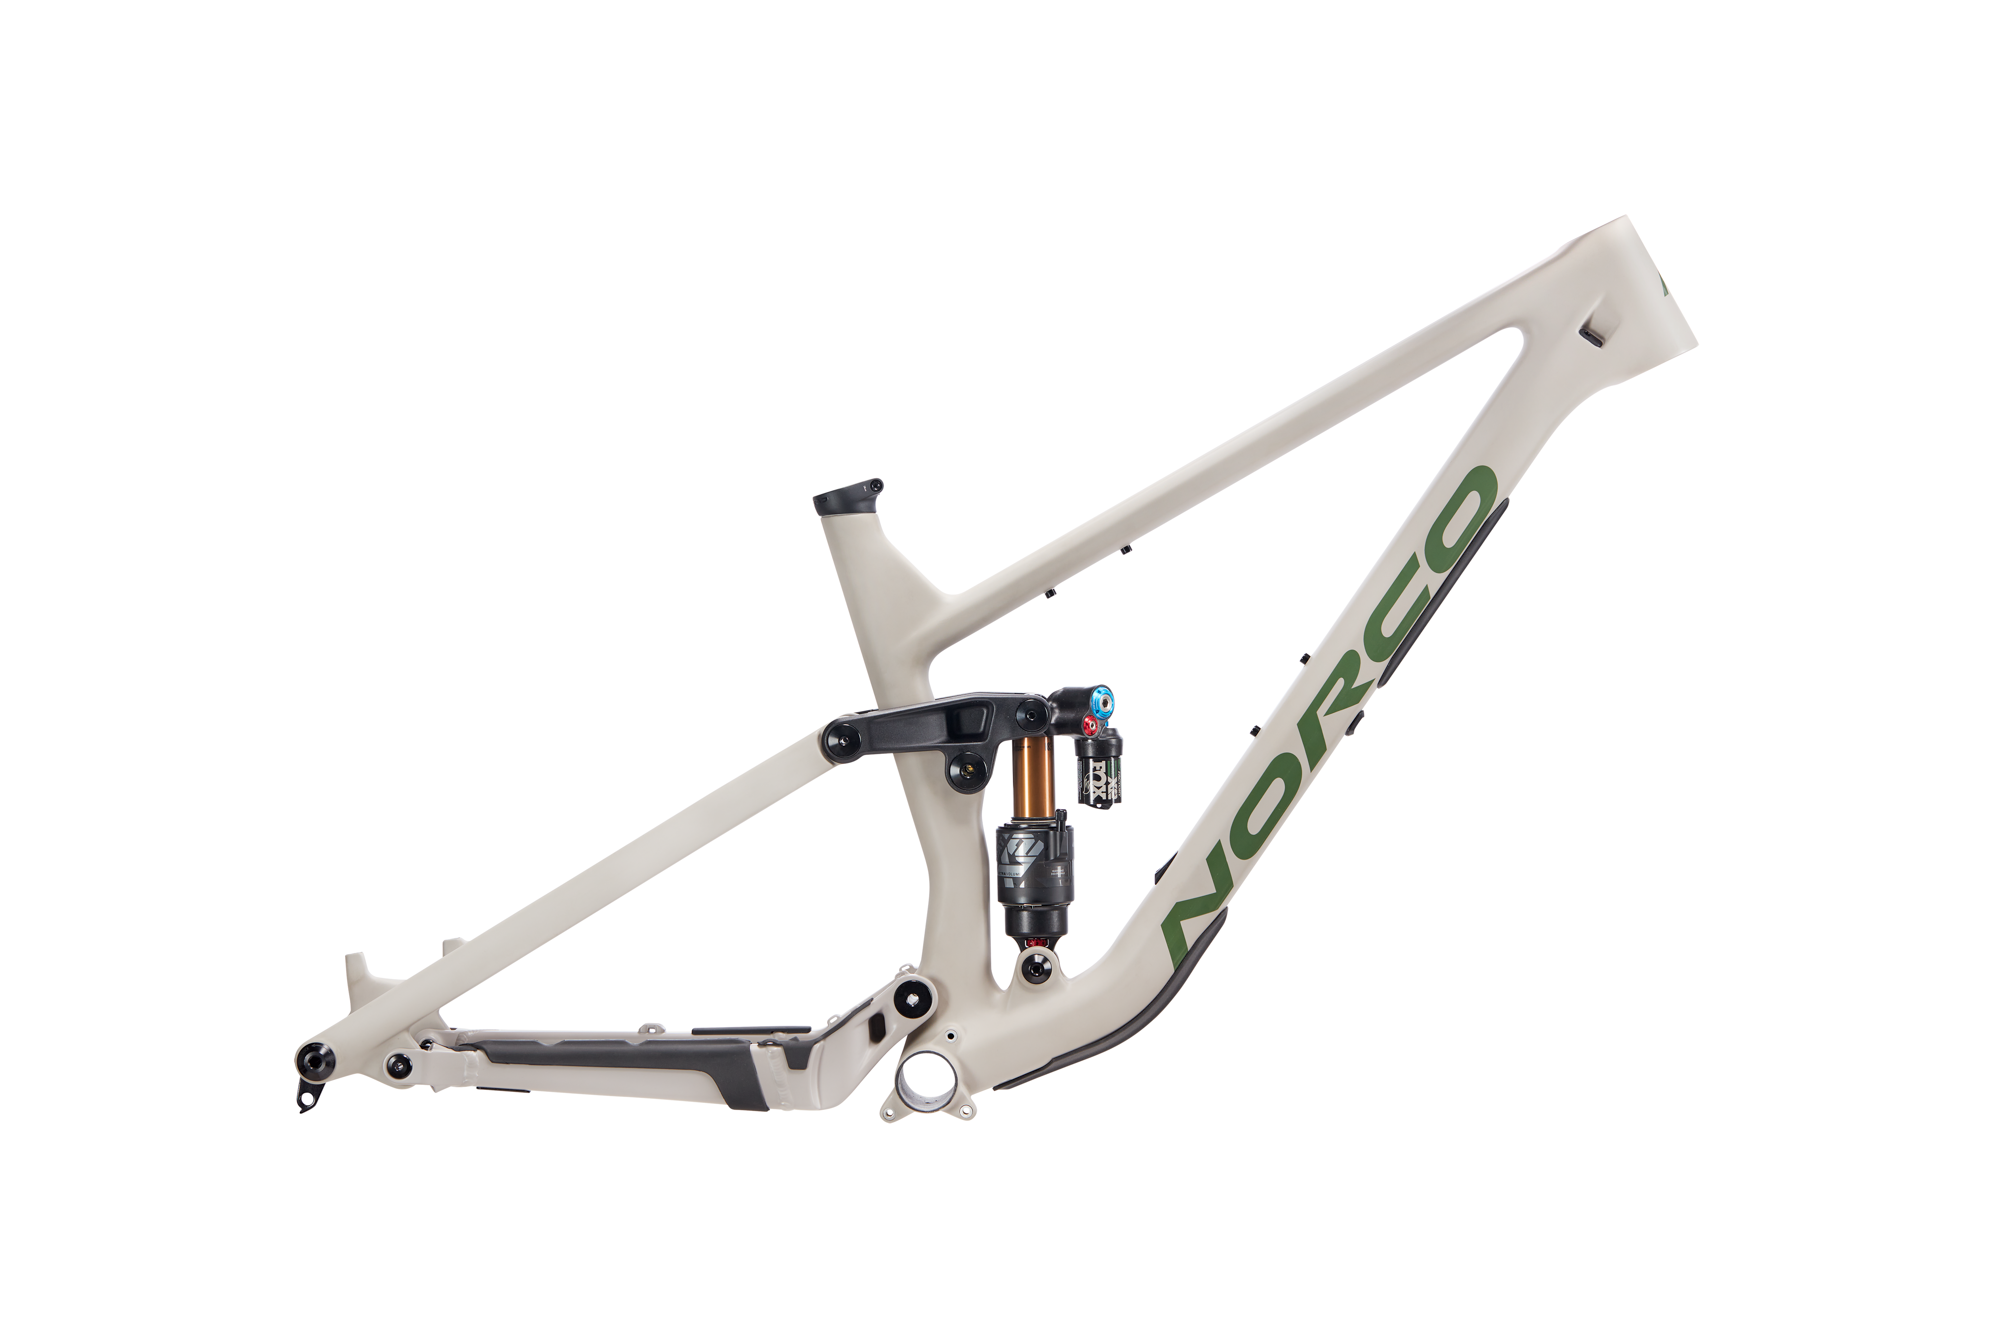 Norco sight frame in white and green